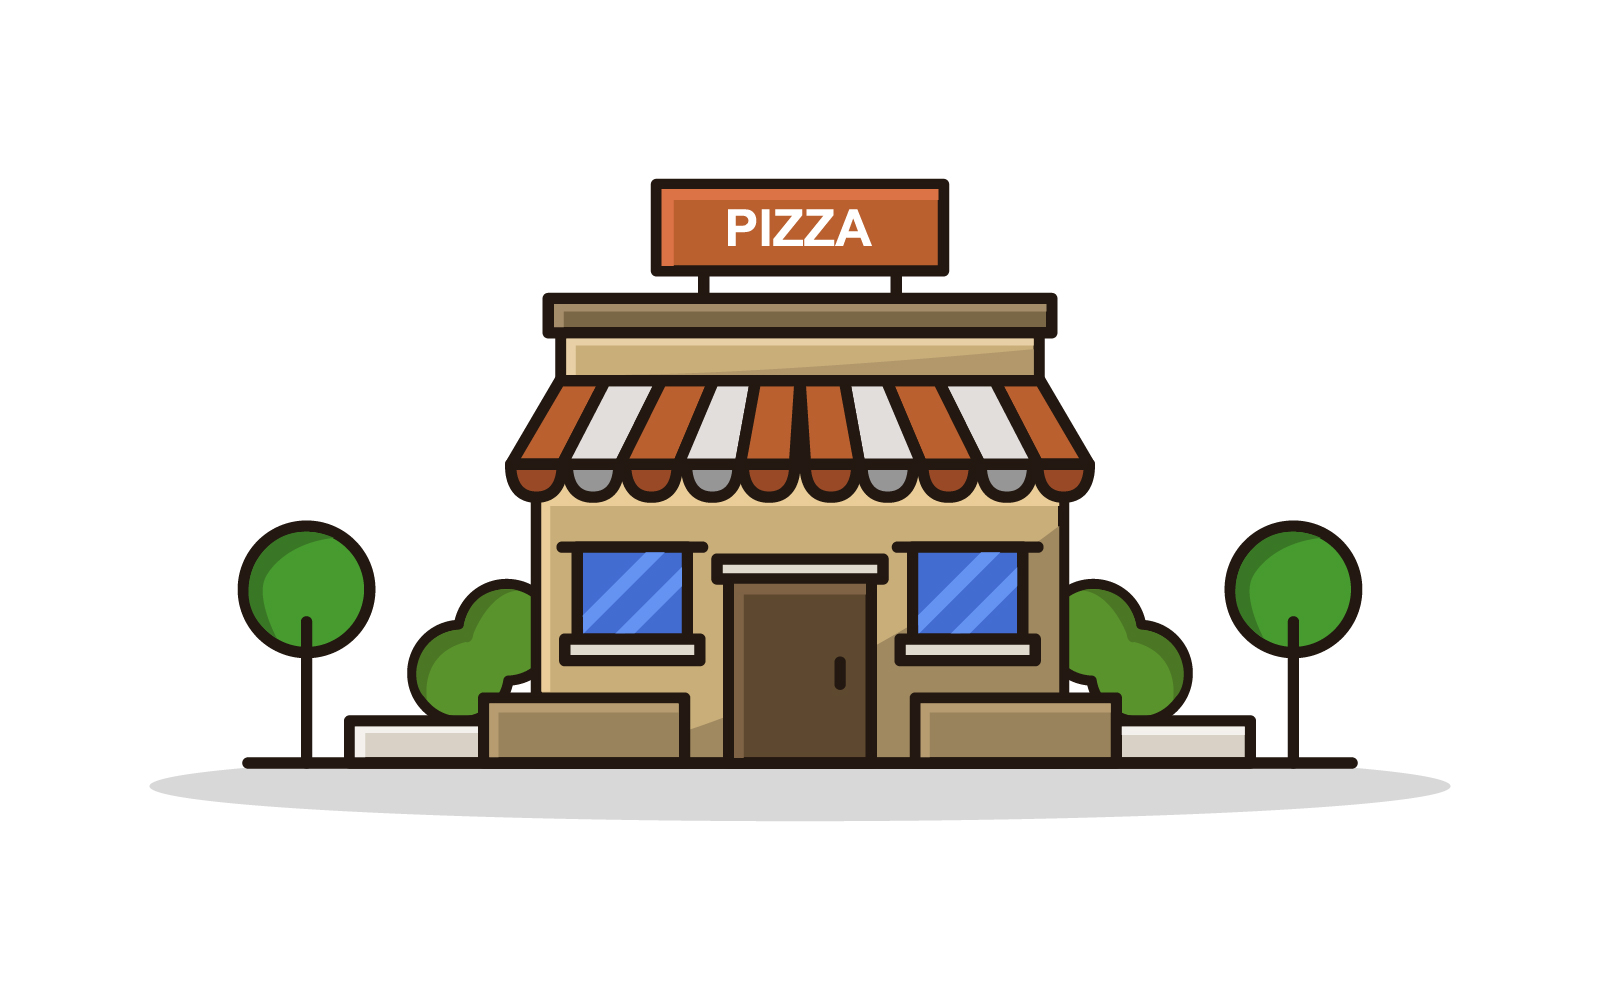 Pizza shop illustrated in vector on a white background